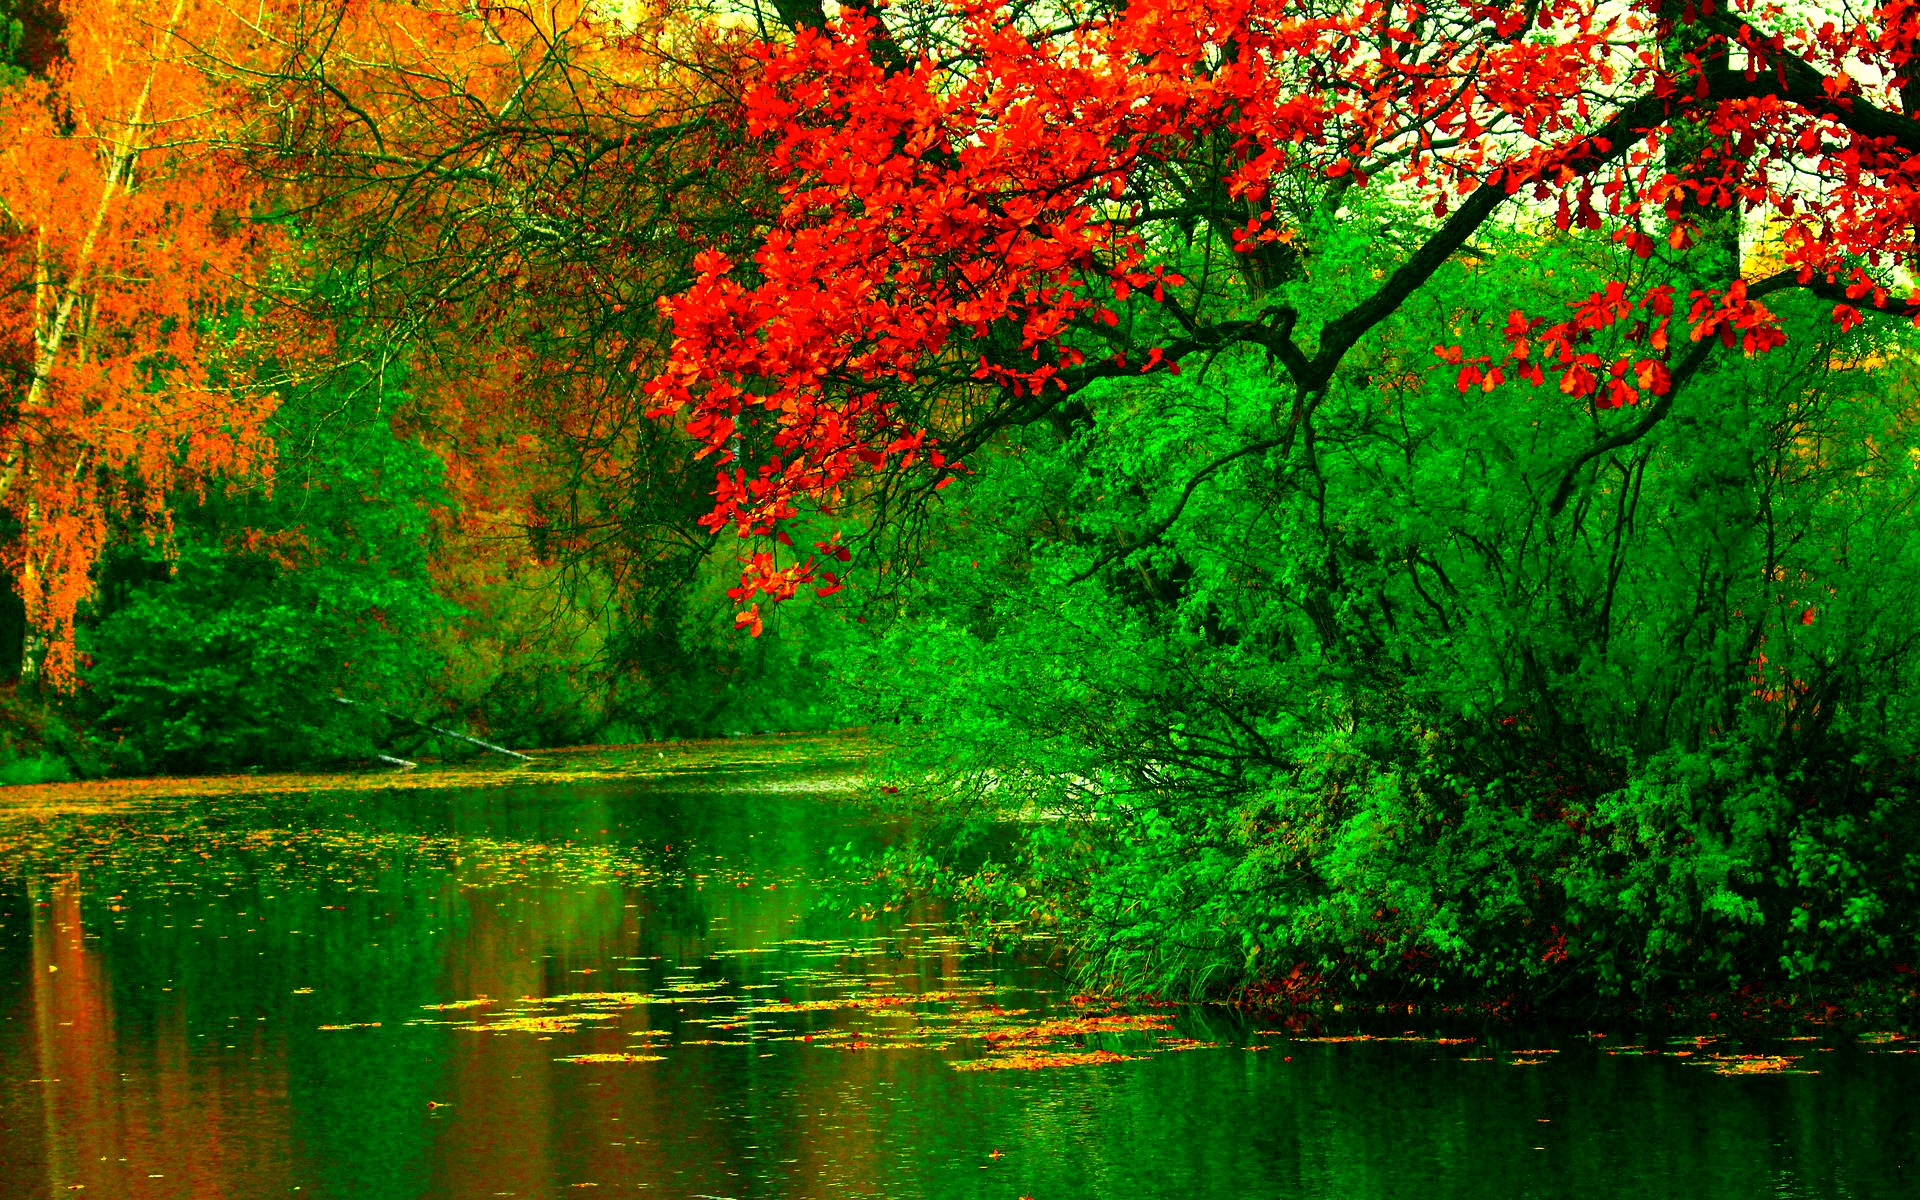 River Background Images Hd - 1920x1200 Wallpaper 